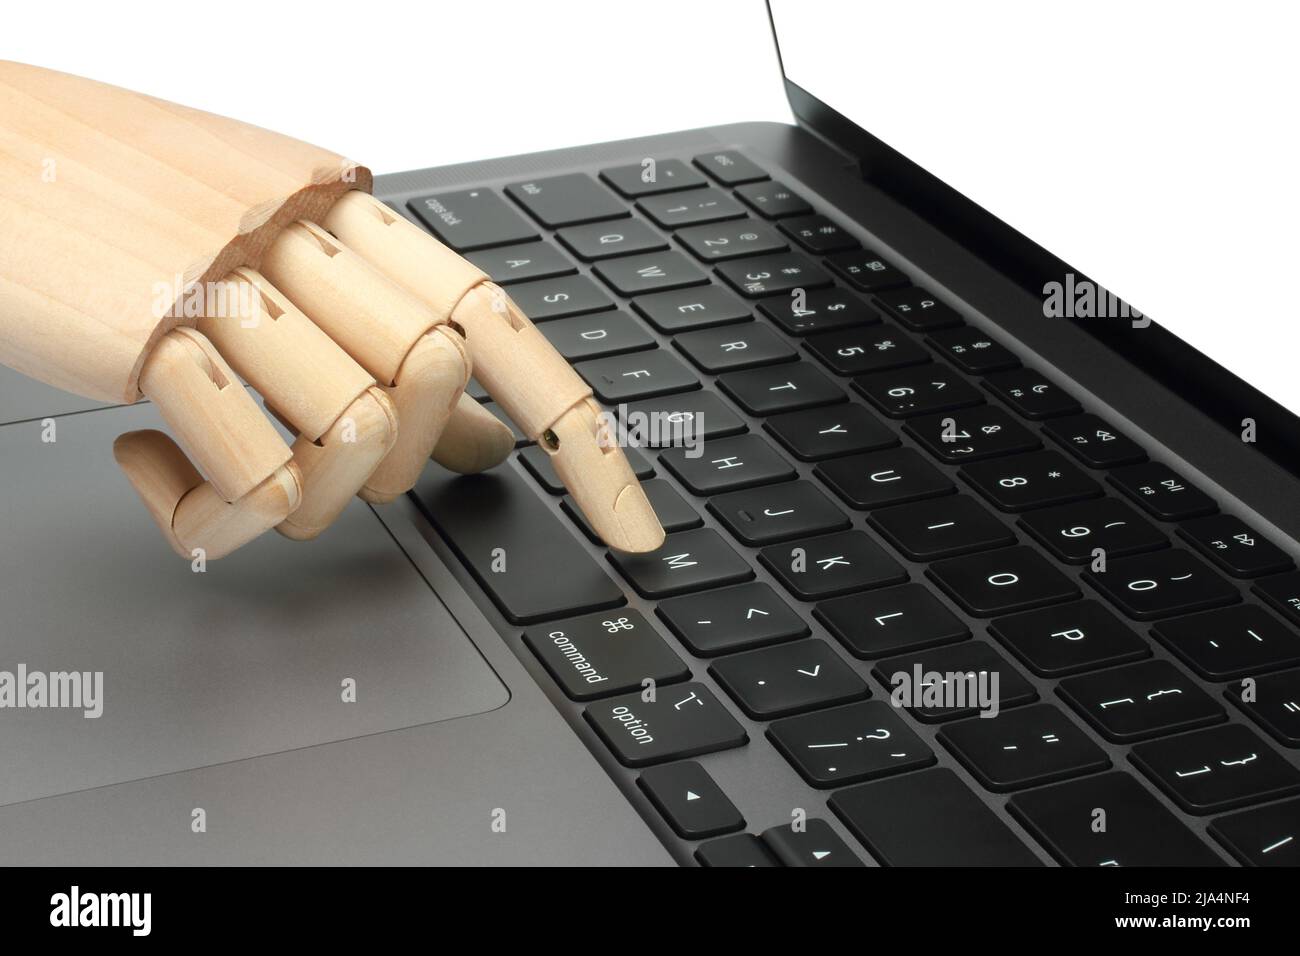 Wooden hand pressing the button of laptop keyboard, on white background close-up Stock Photo